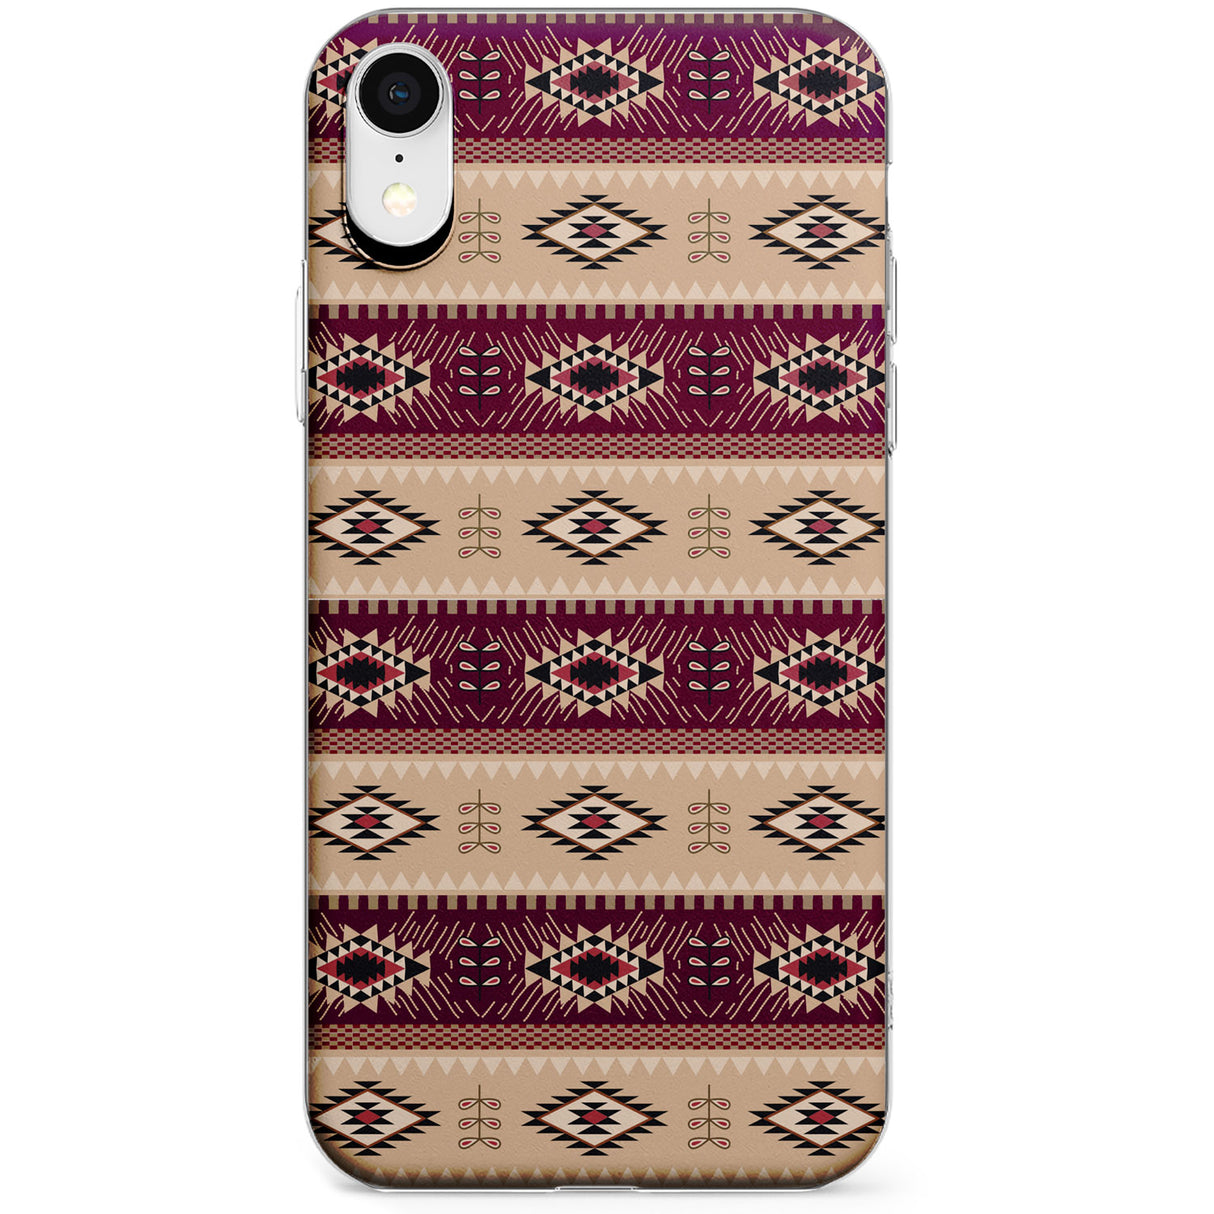 Western Poncho Phone Case for iPhone X, XS Max, XR